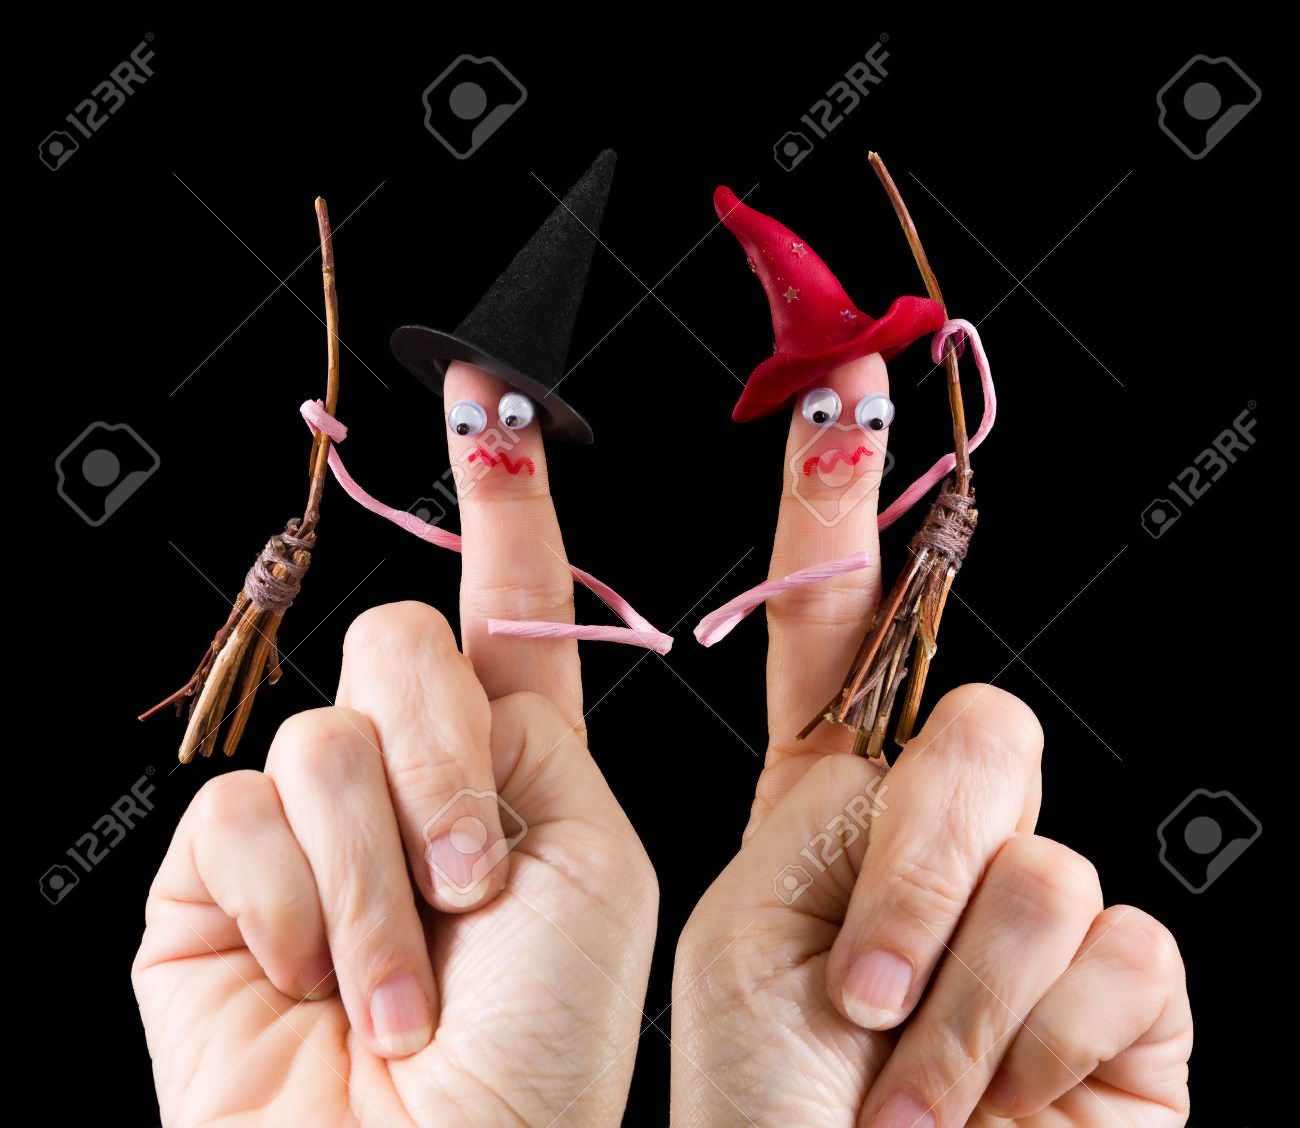 Finger Puppet Funny Witches Image For Whatsapp